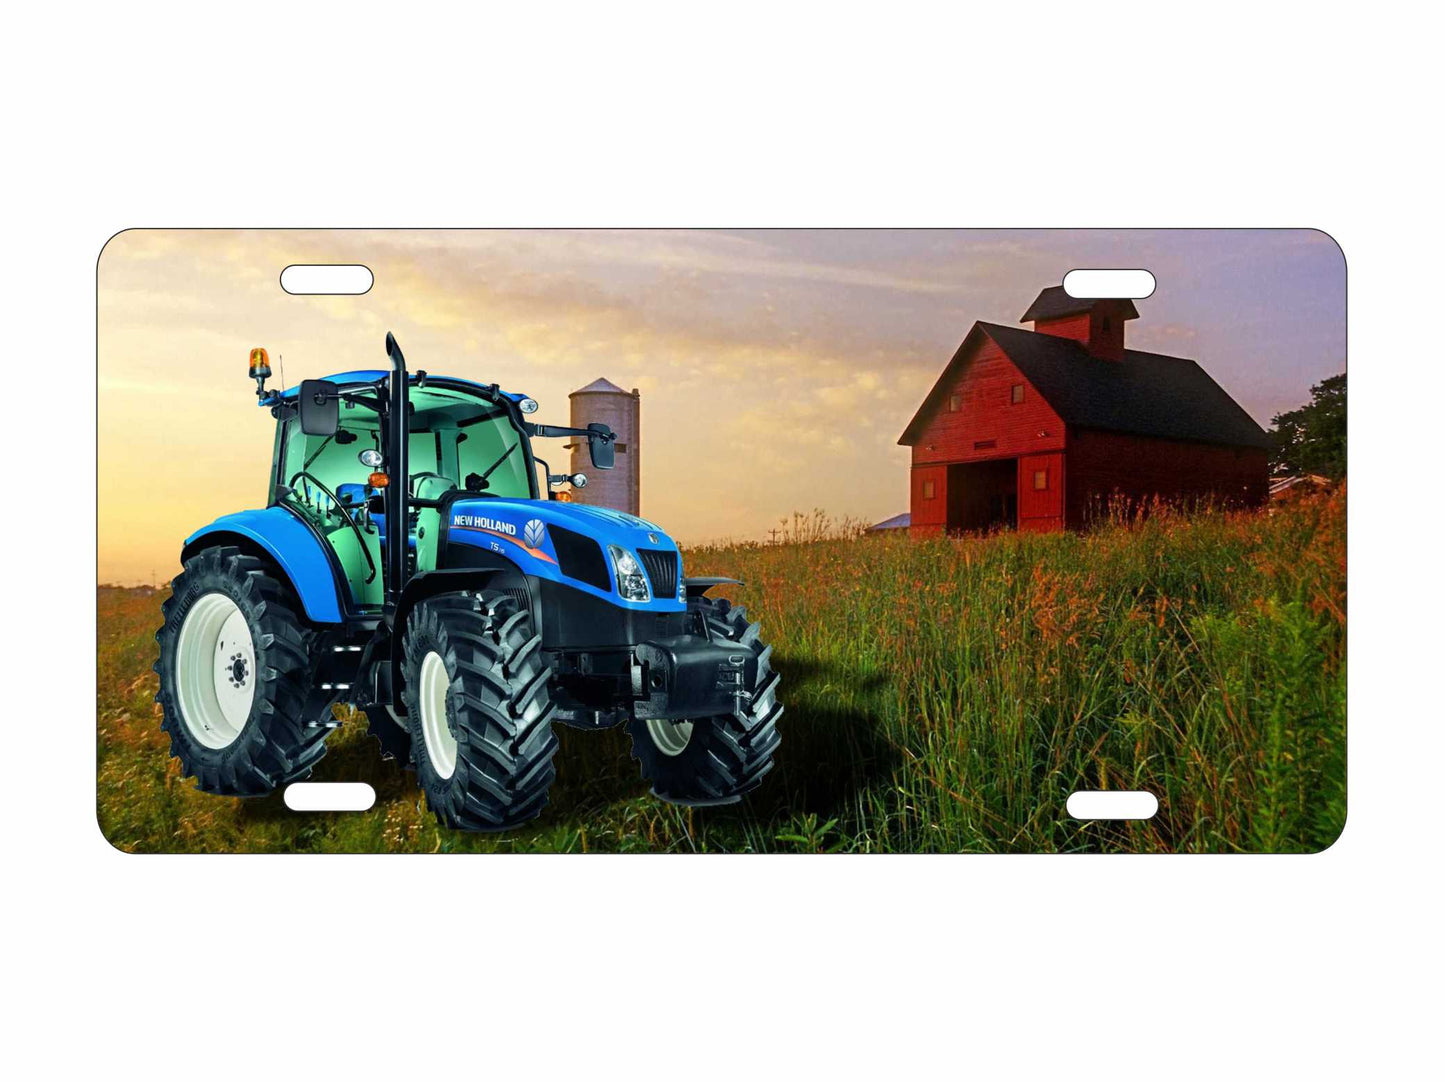 Blue Tractor personalized novelty front license plate farm life decorative car tag